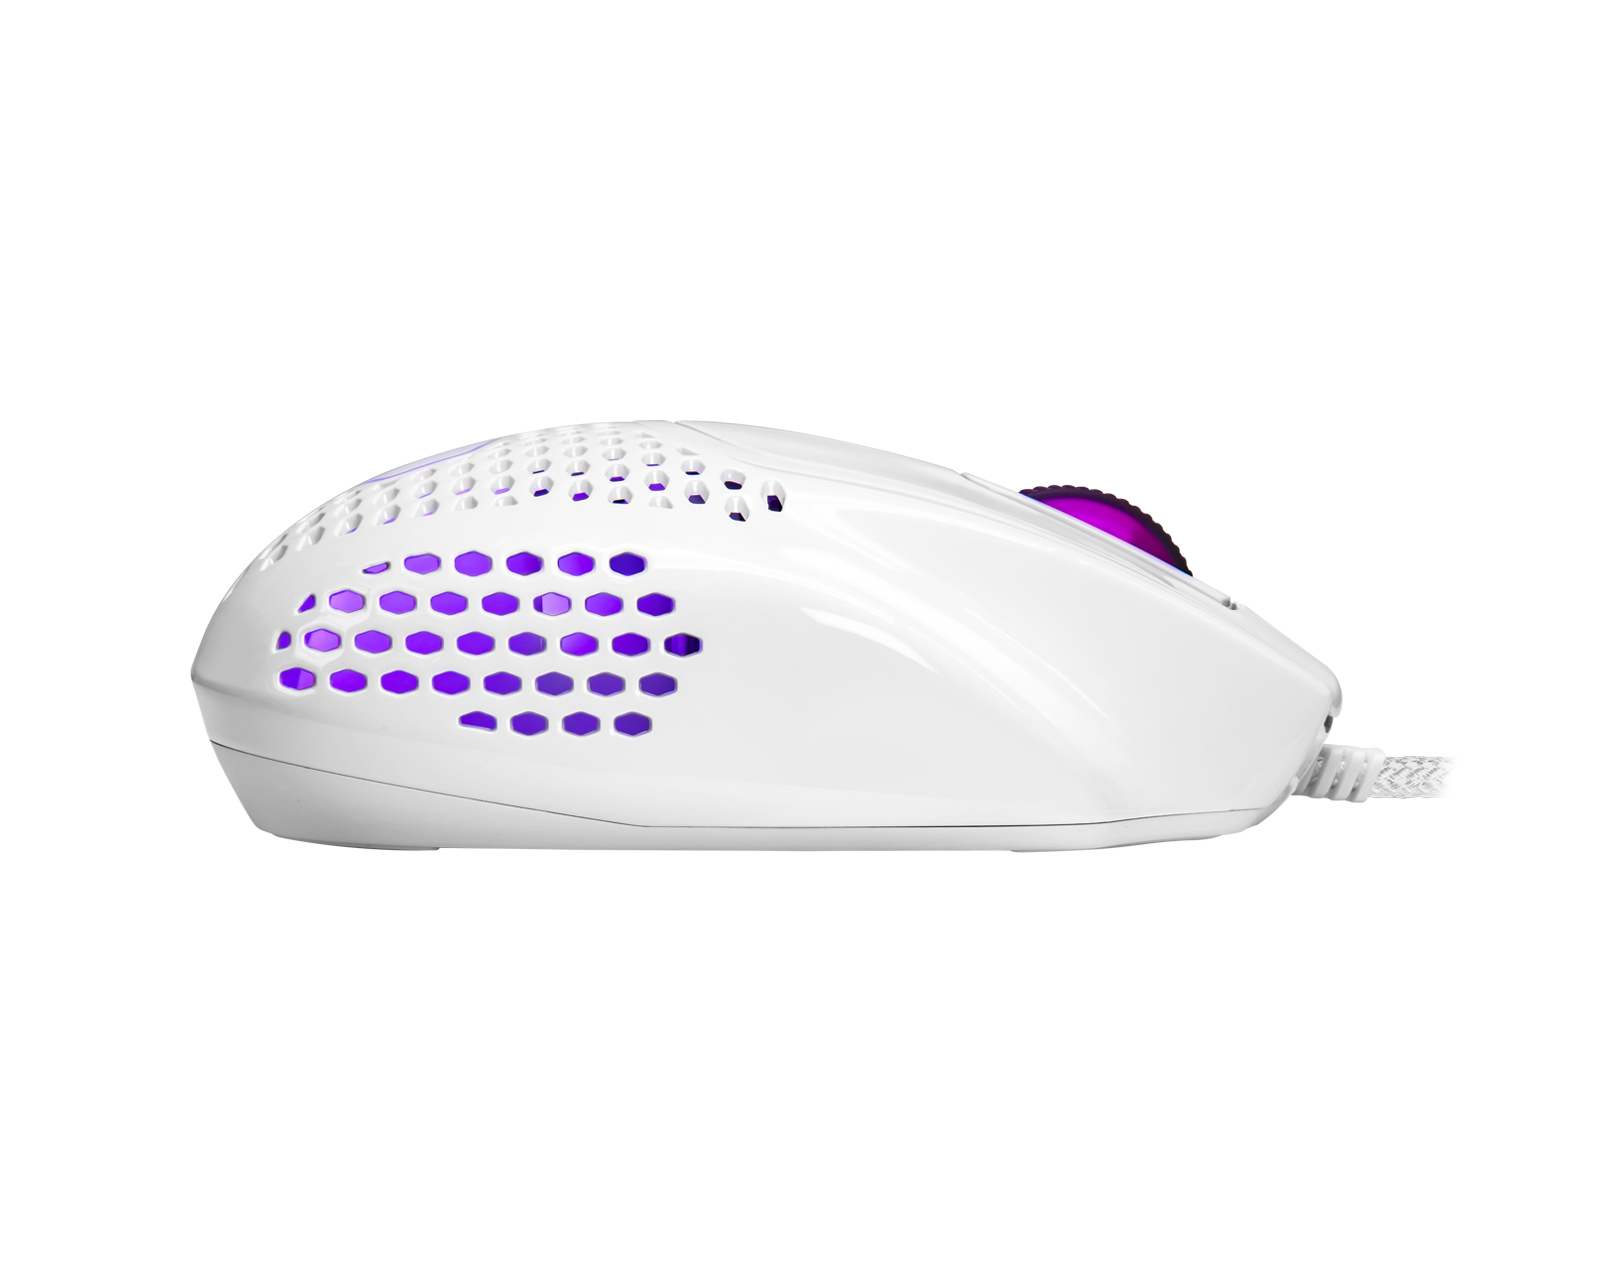 Cooler Master MM720 Gaming Mouse Glossy White